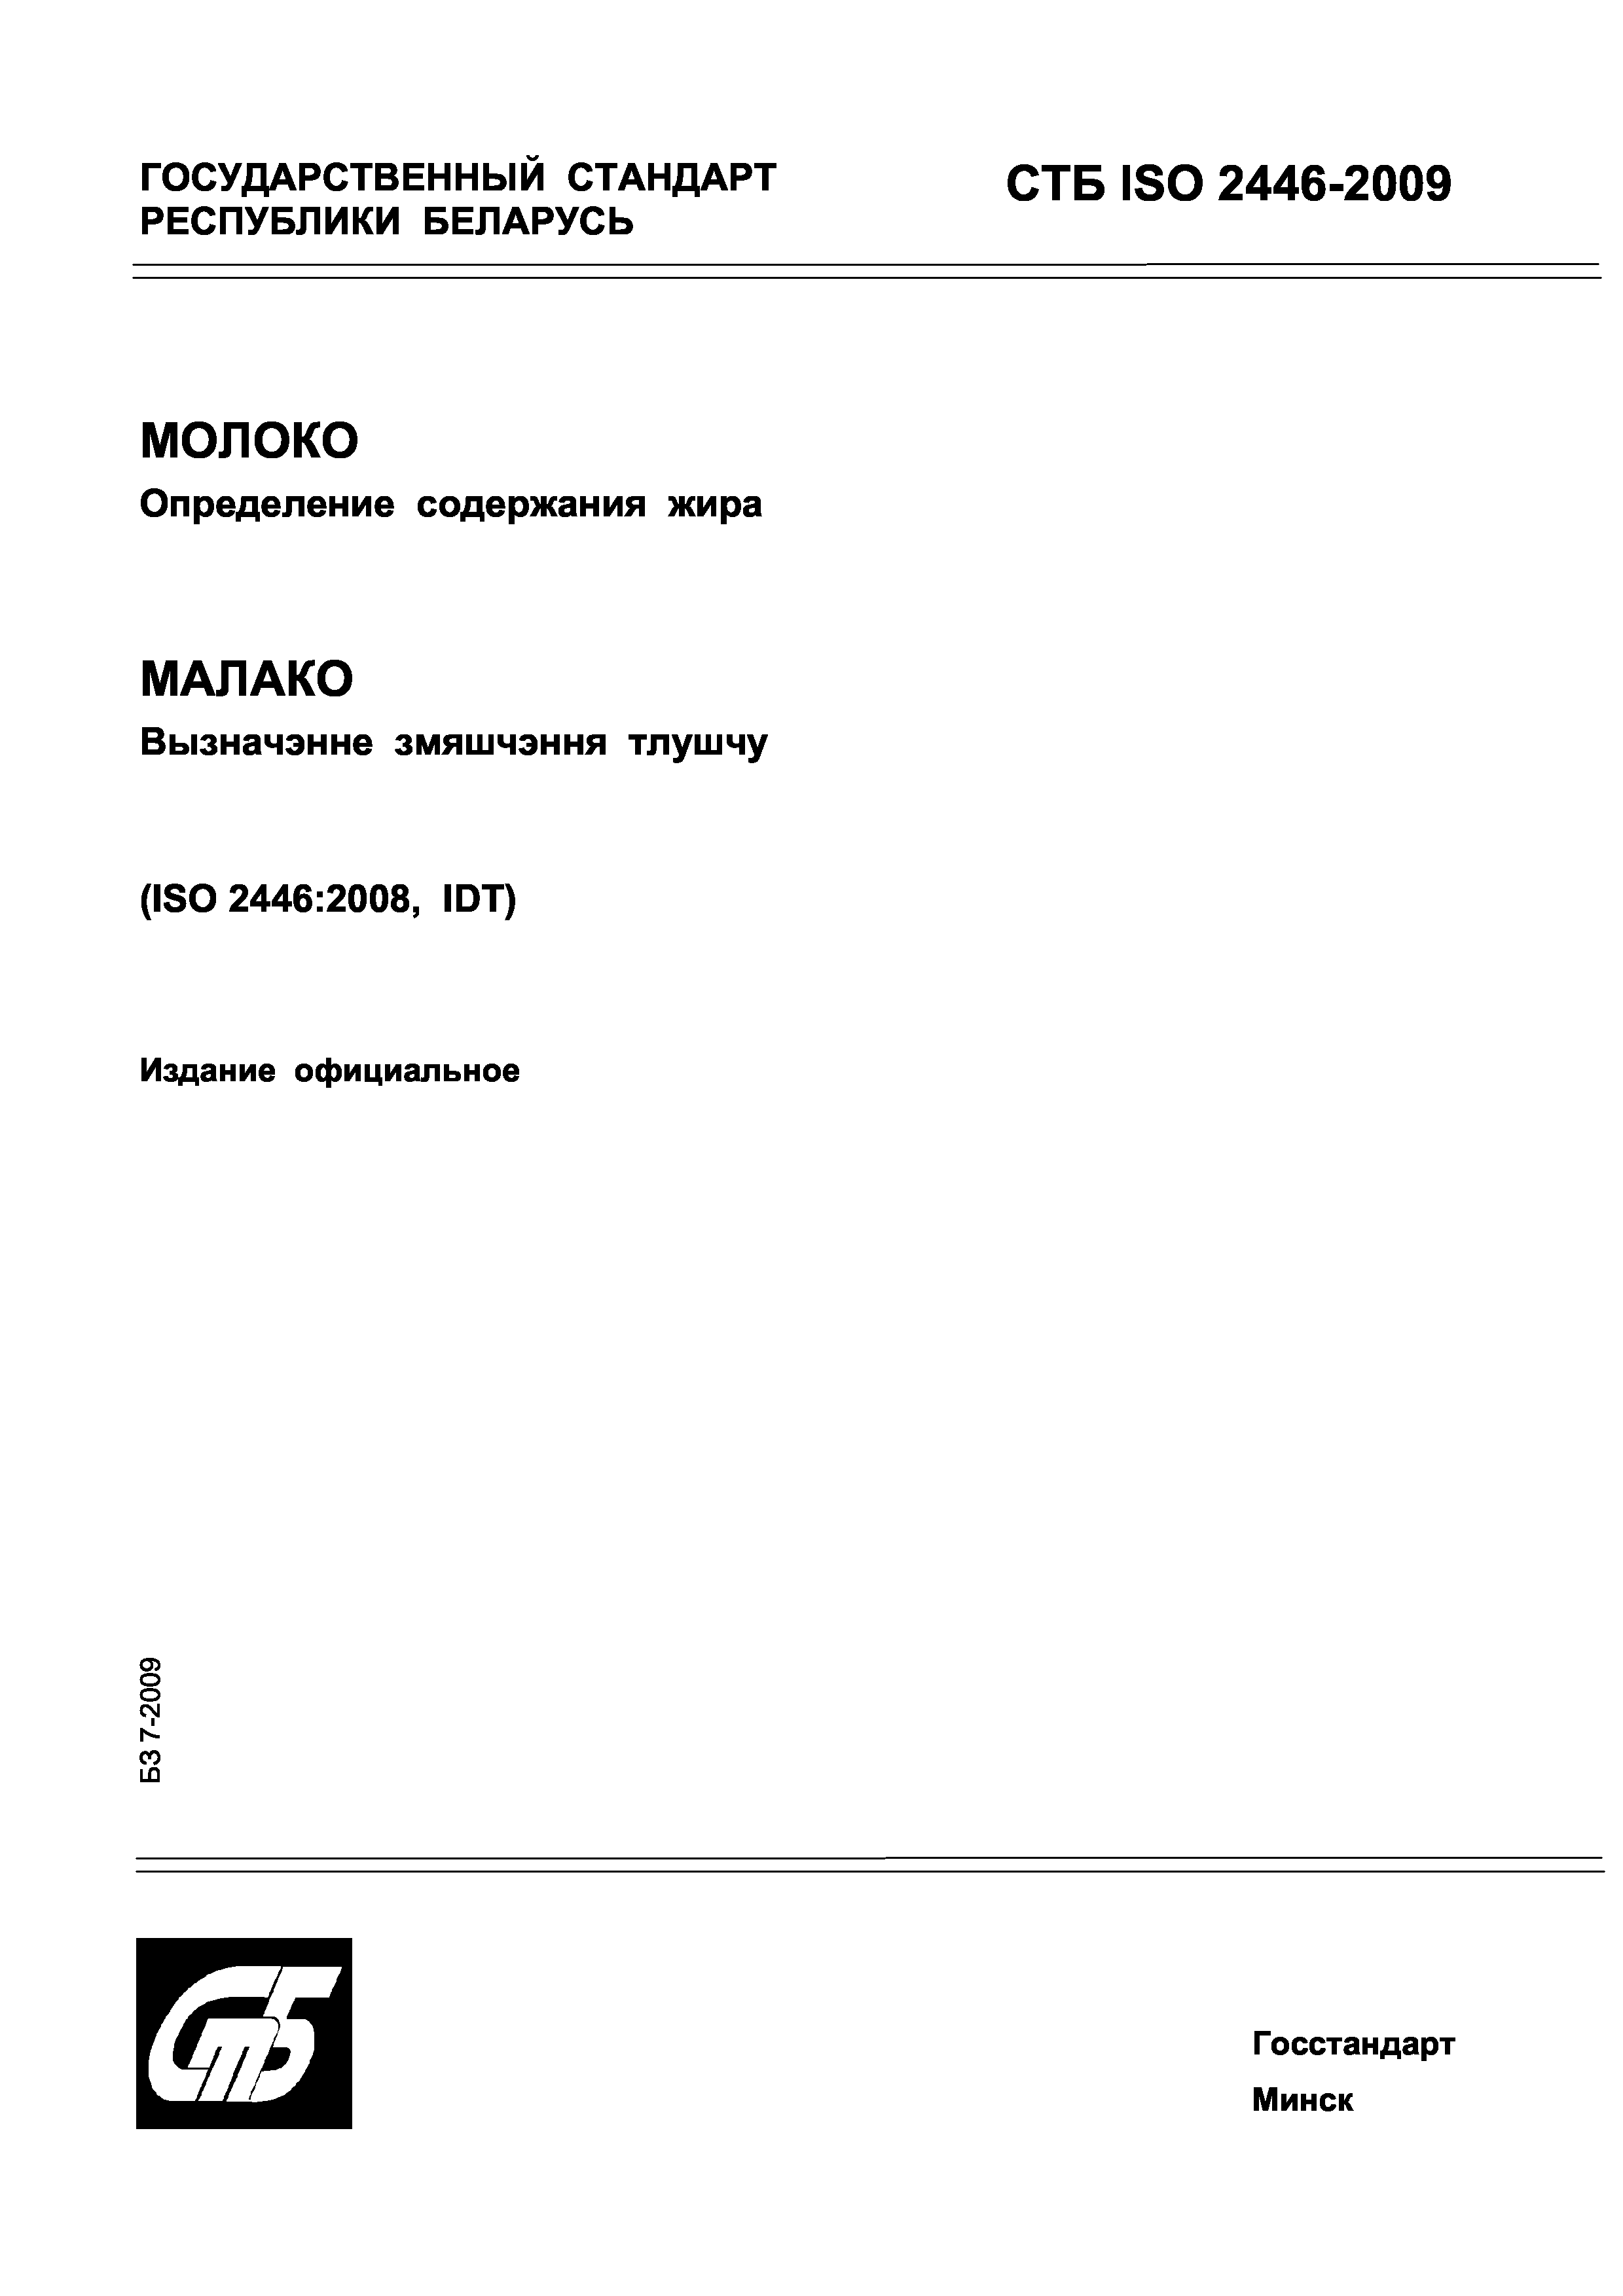 СТБ ISO 2446-2009